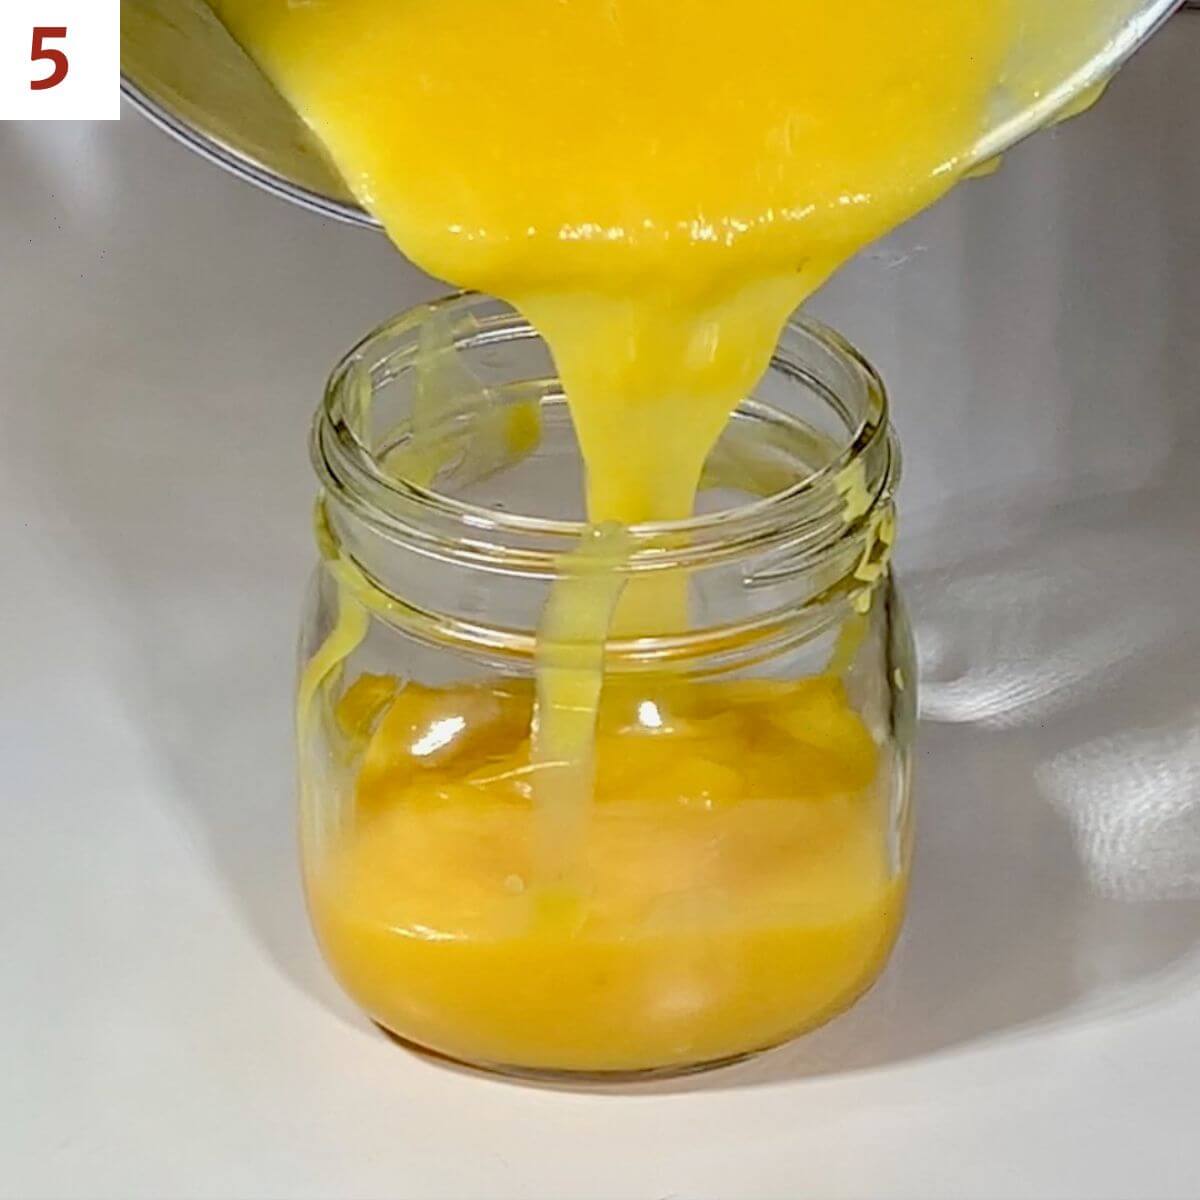 Finished lemon curd being poured into a glass jar.